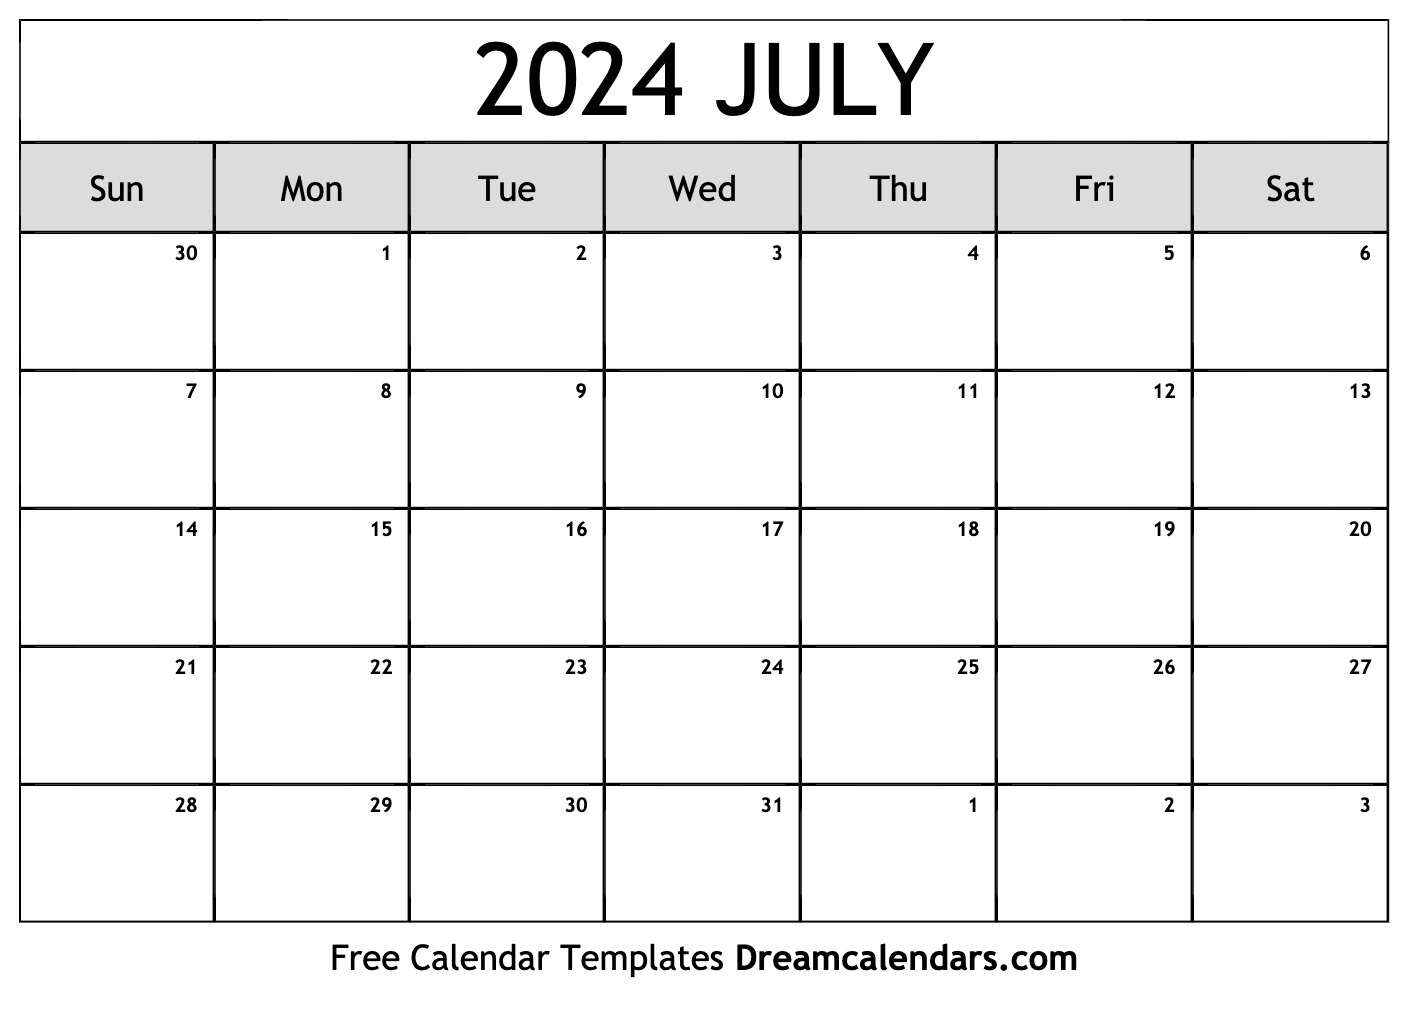 July 2024 Calendar - Free Printable With Holidays And Observances within Calendar Pages July 2024